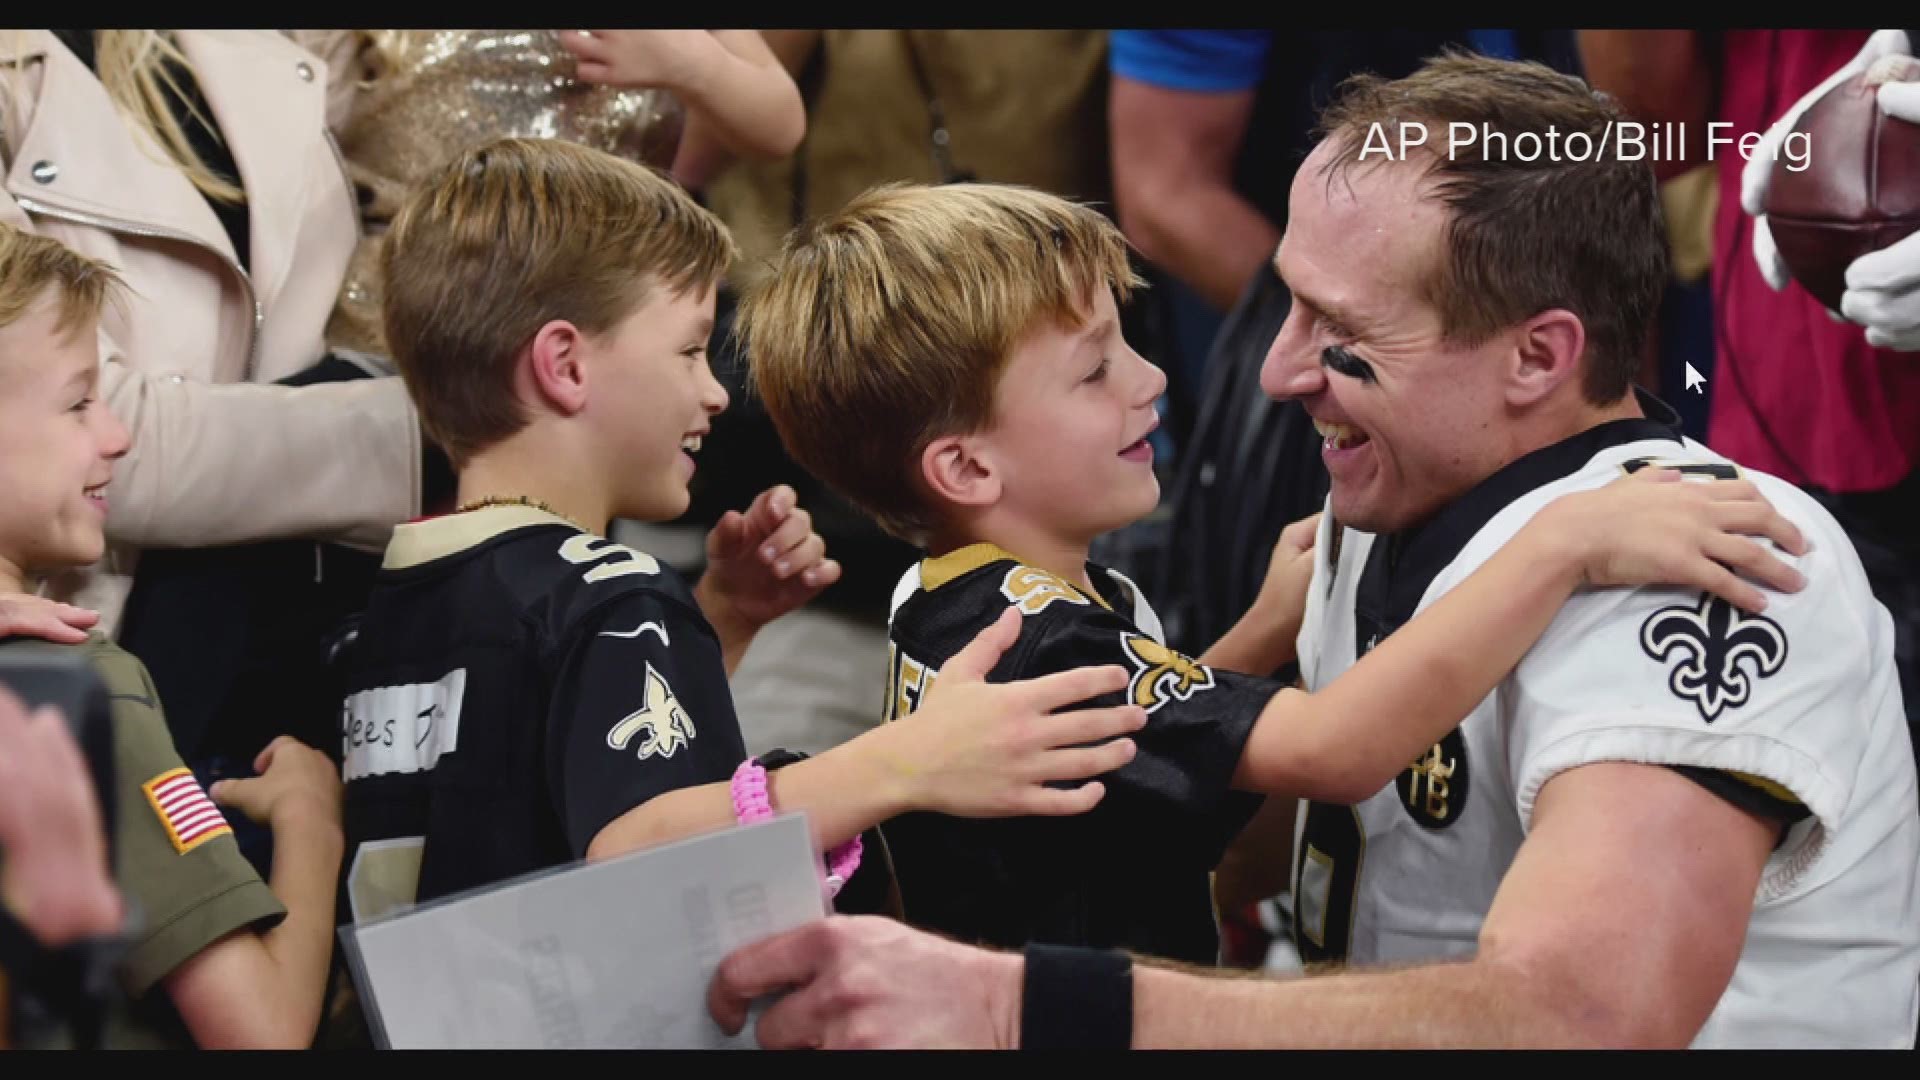 Drew Brees has not announced if he will retire from football. And the Saints have said he is welcome back.